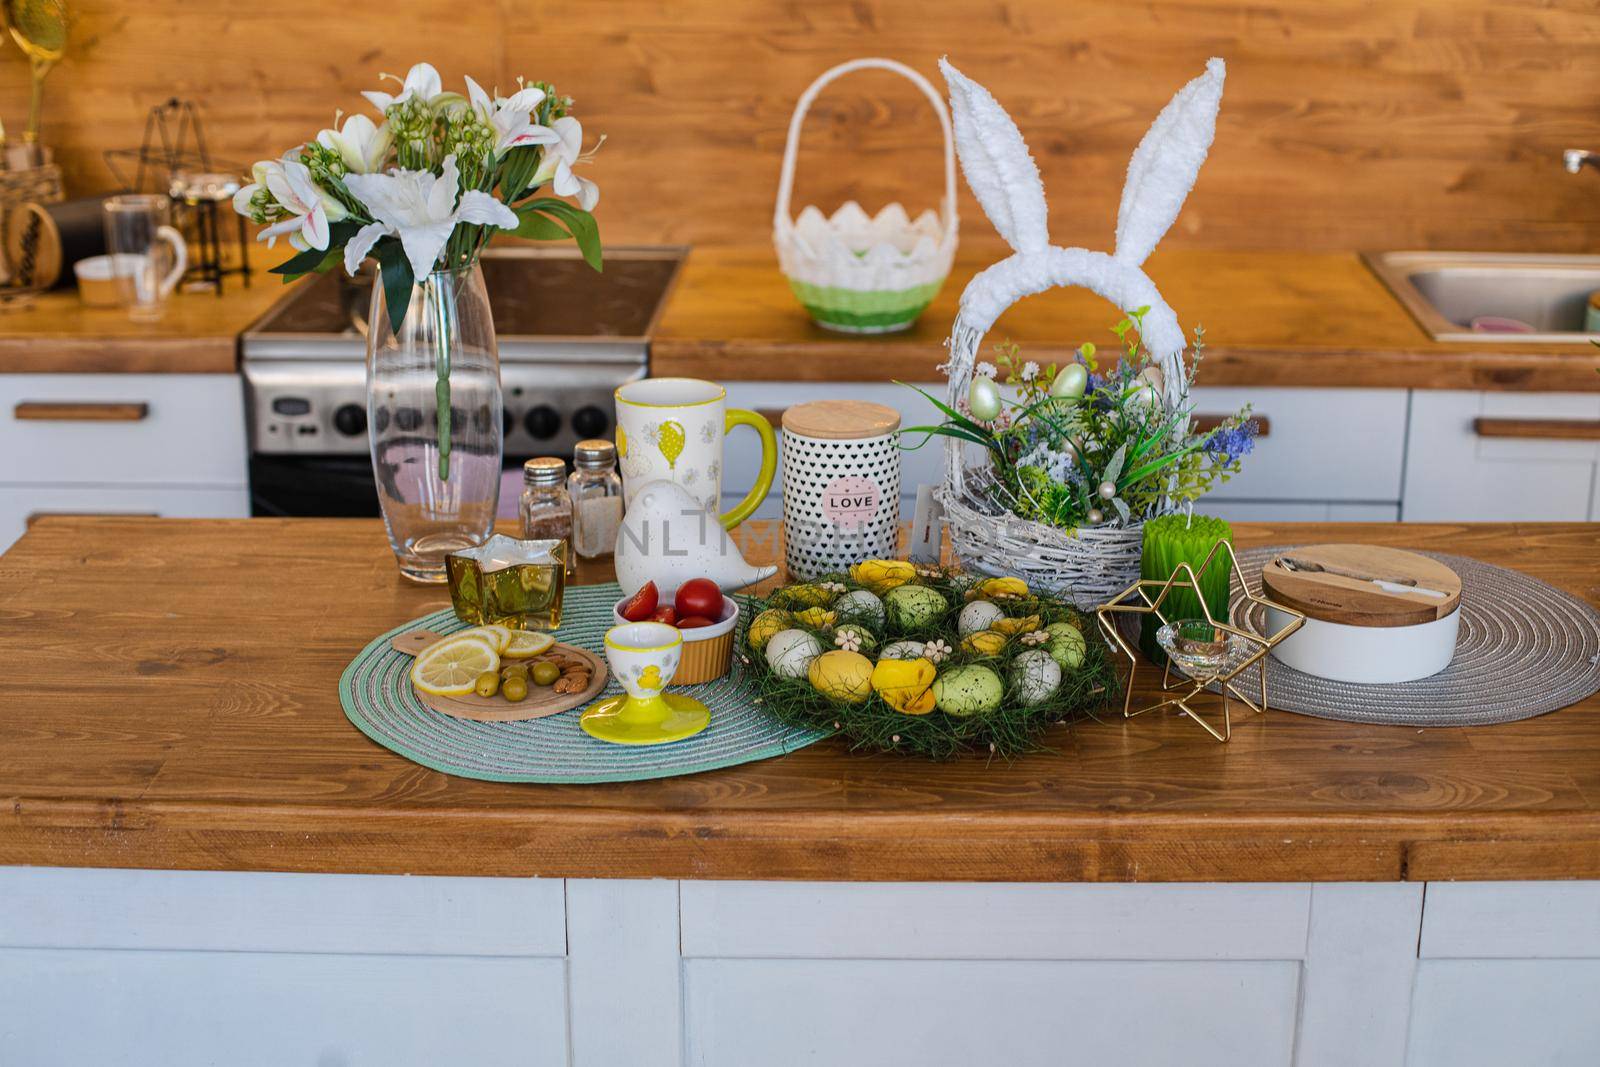 Still life of painted Easter eggs in wreath with lemon and olives and tomatoes on wooden kitchen counter. A lovely basket with bunny ears with flowers and decorative eggs. Vase of lilies on the counter.